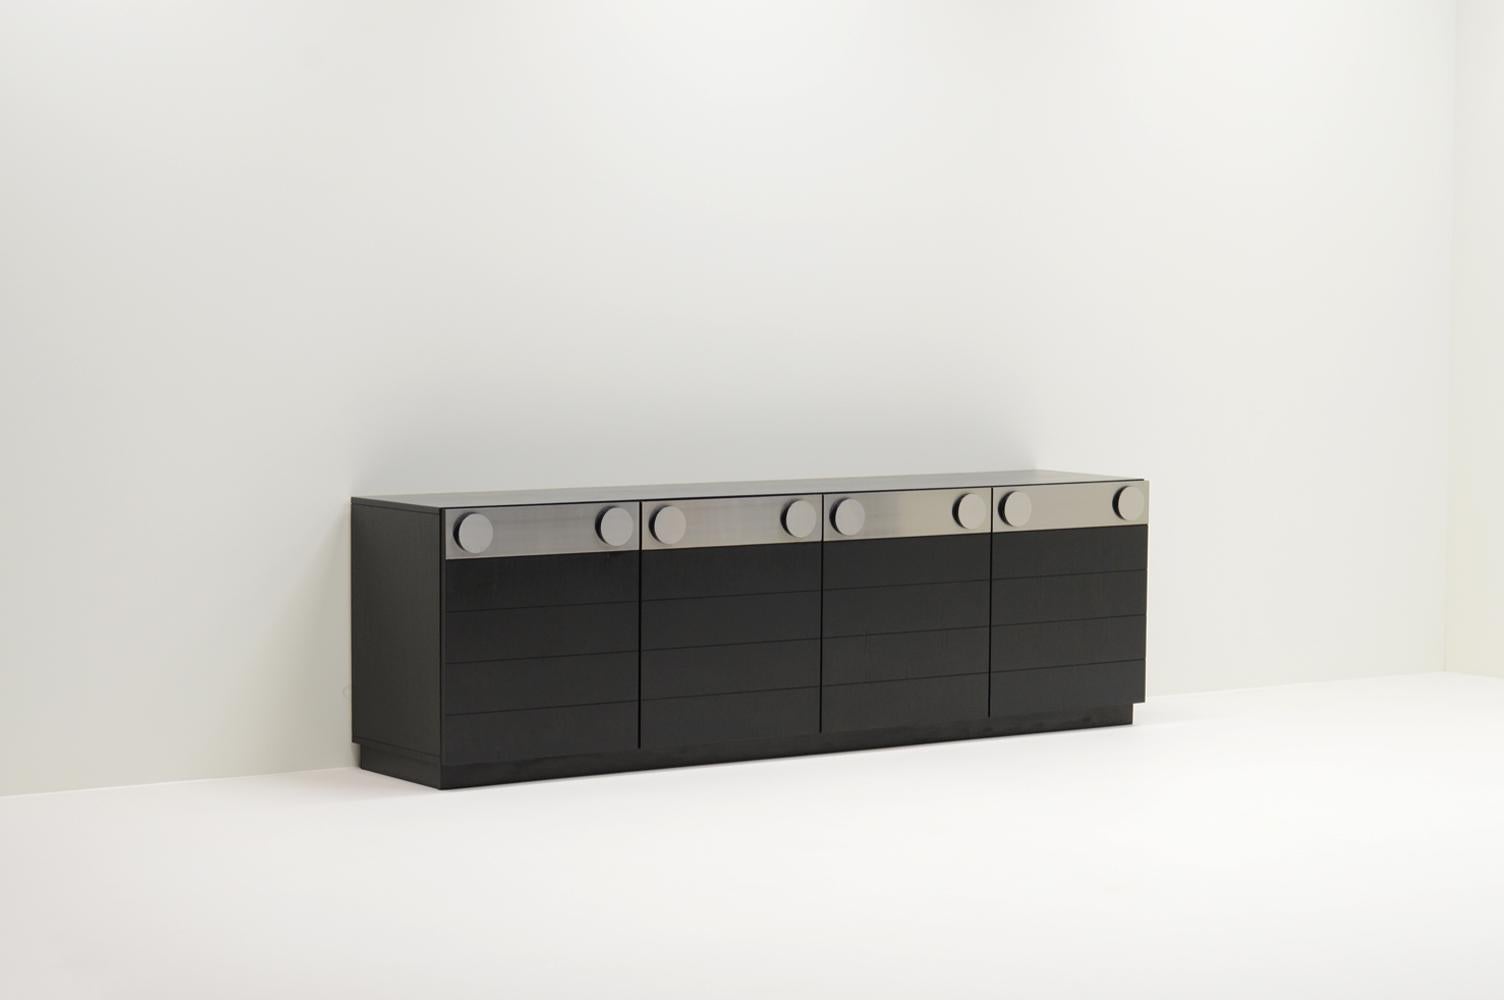 Large black Brutalist sideboard, Belgium 1970s. Shelving and drawers on the inside. The sideboard features a satin / matt black finish and brushed aluminum details. Some wear on the handles. In good vintage condition. 

  